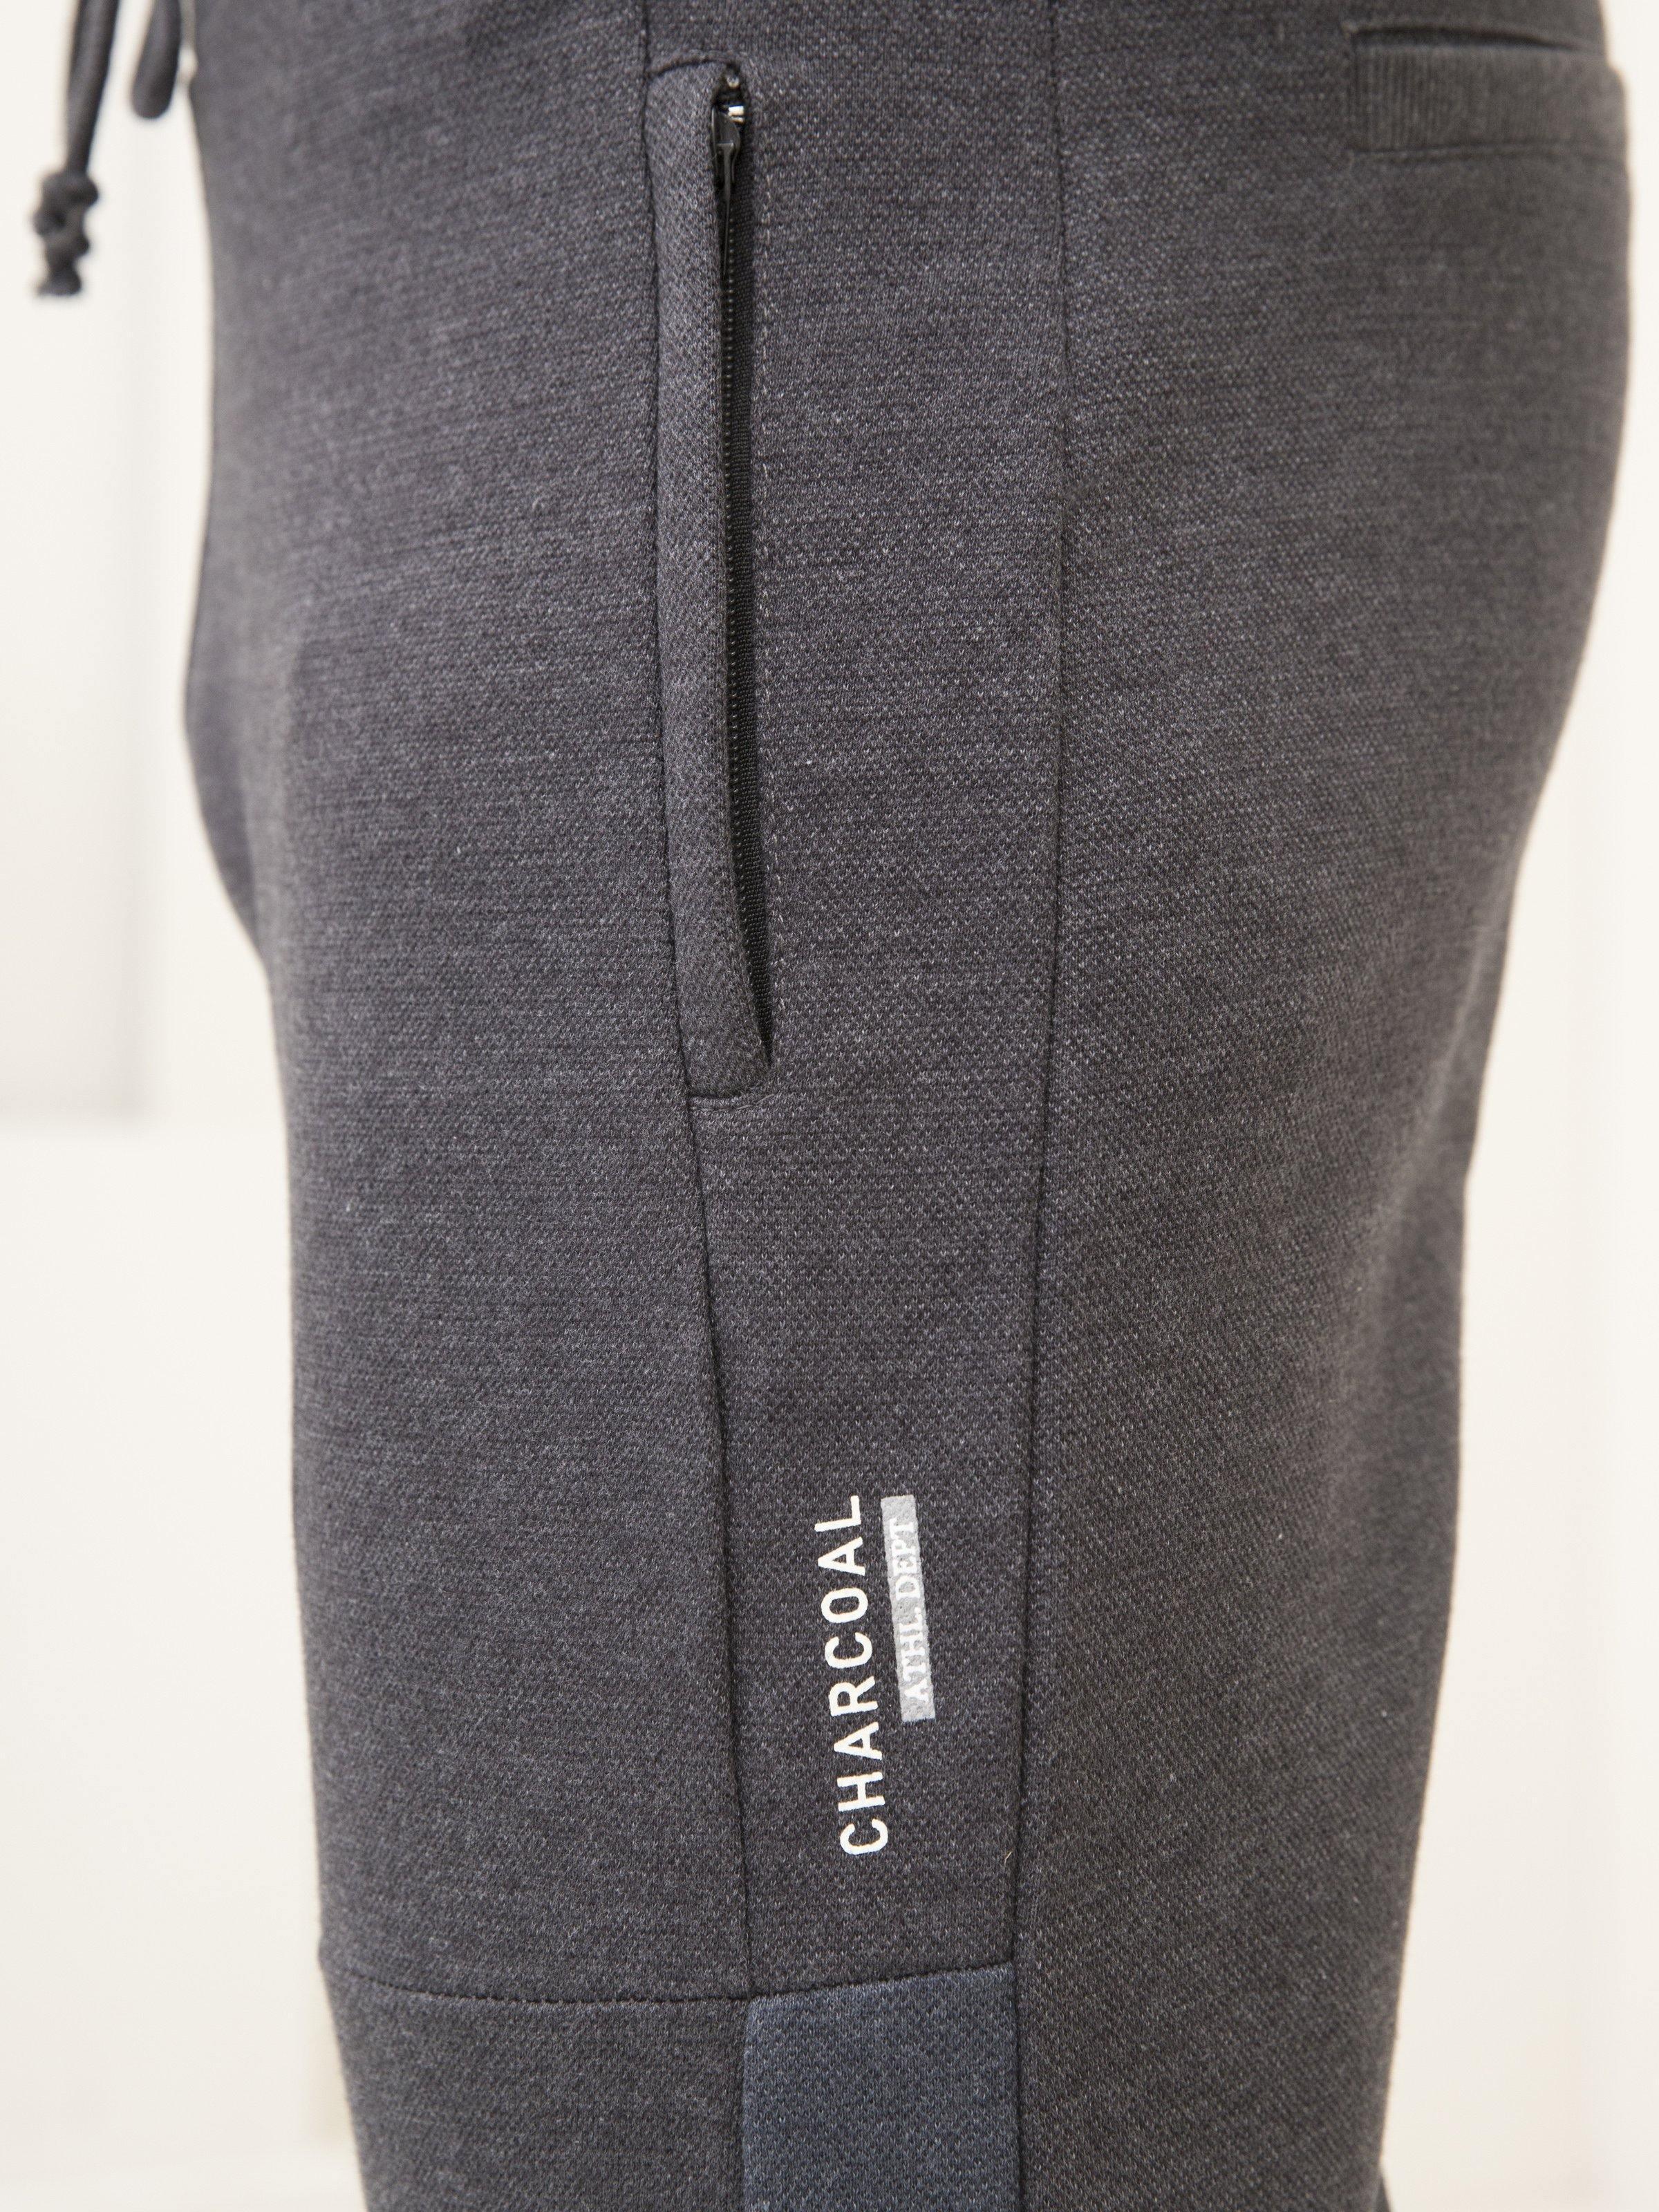 PIQUE FLEECE TROUSER DARK CHARCOAL at Charcoal Clothing